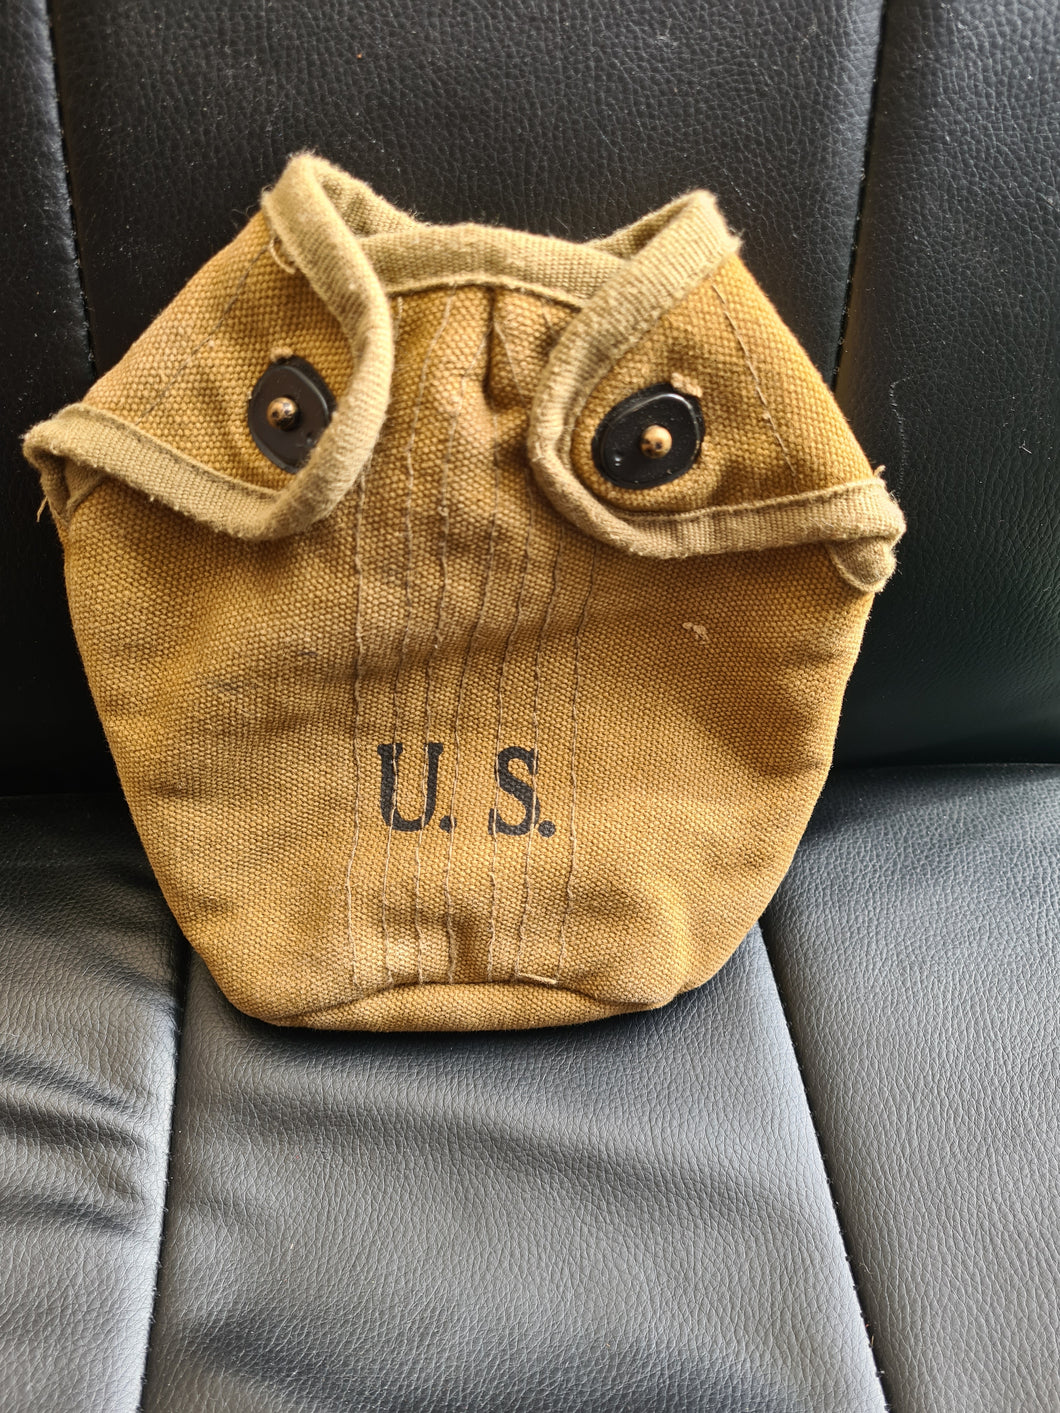 WW11 US water bottle cover reproduction